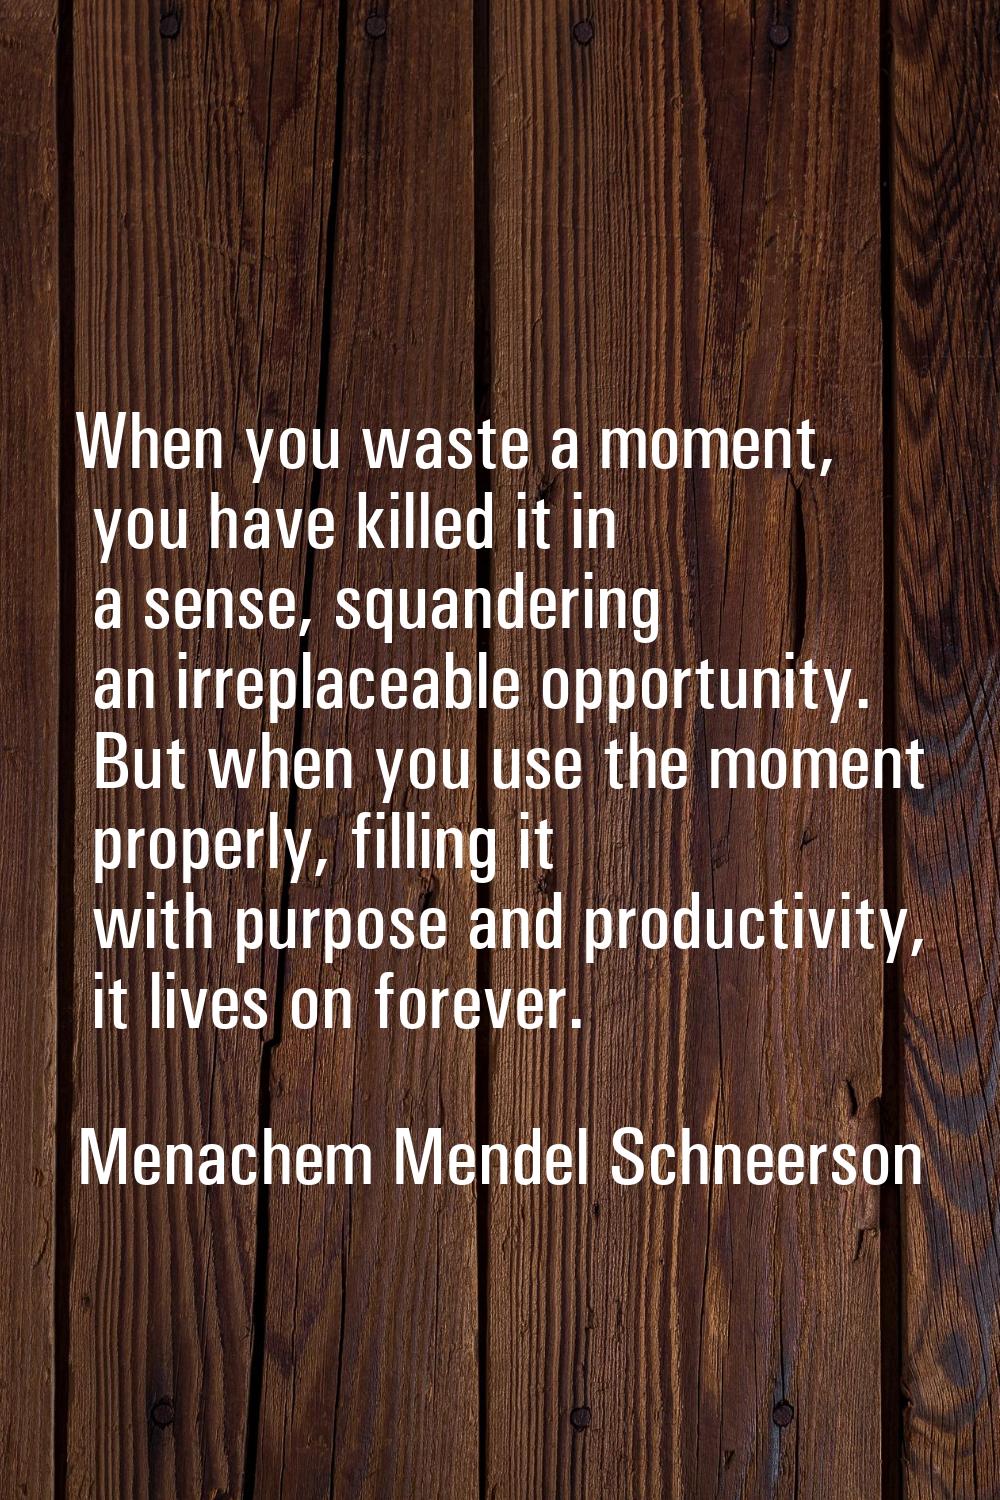 When you waste a moment, you have killed it in a sense, squandering an irreplaceable opportunity. B